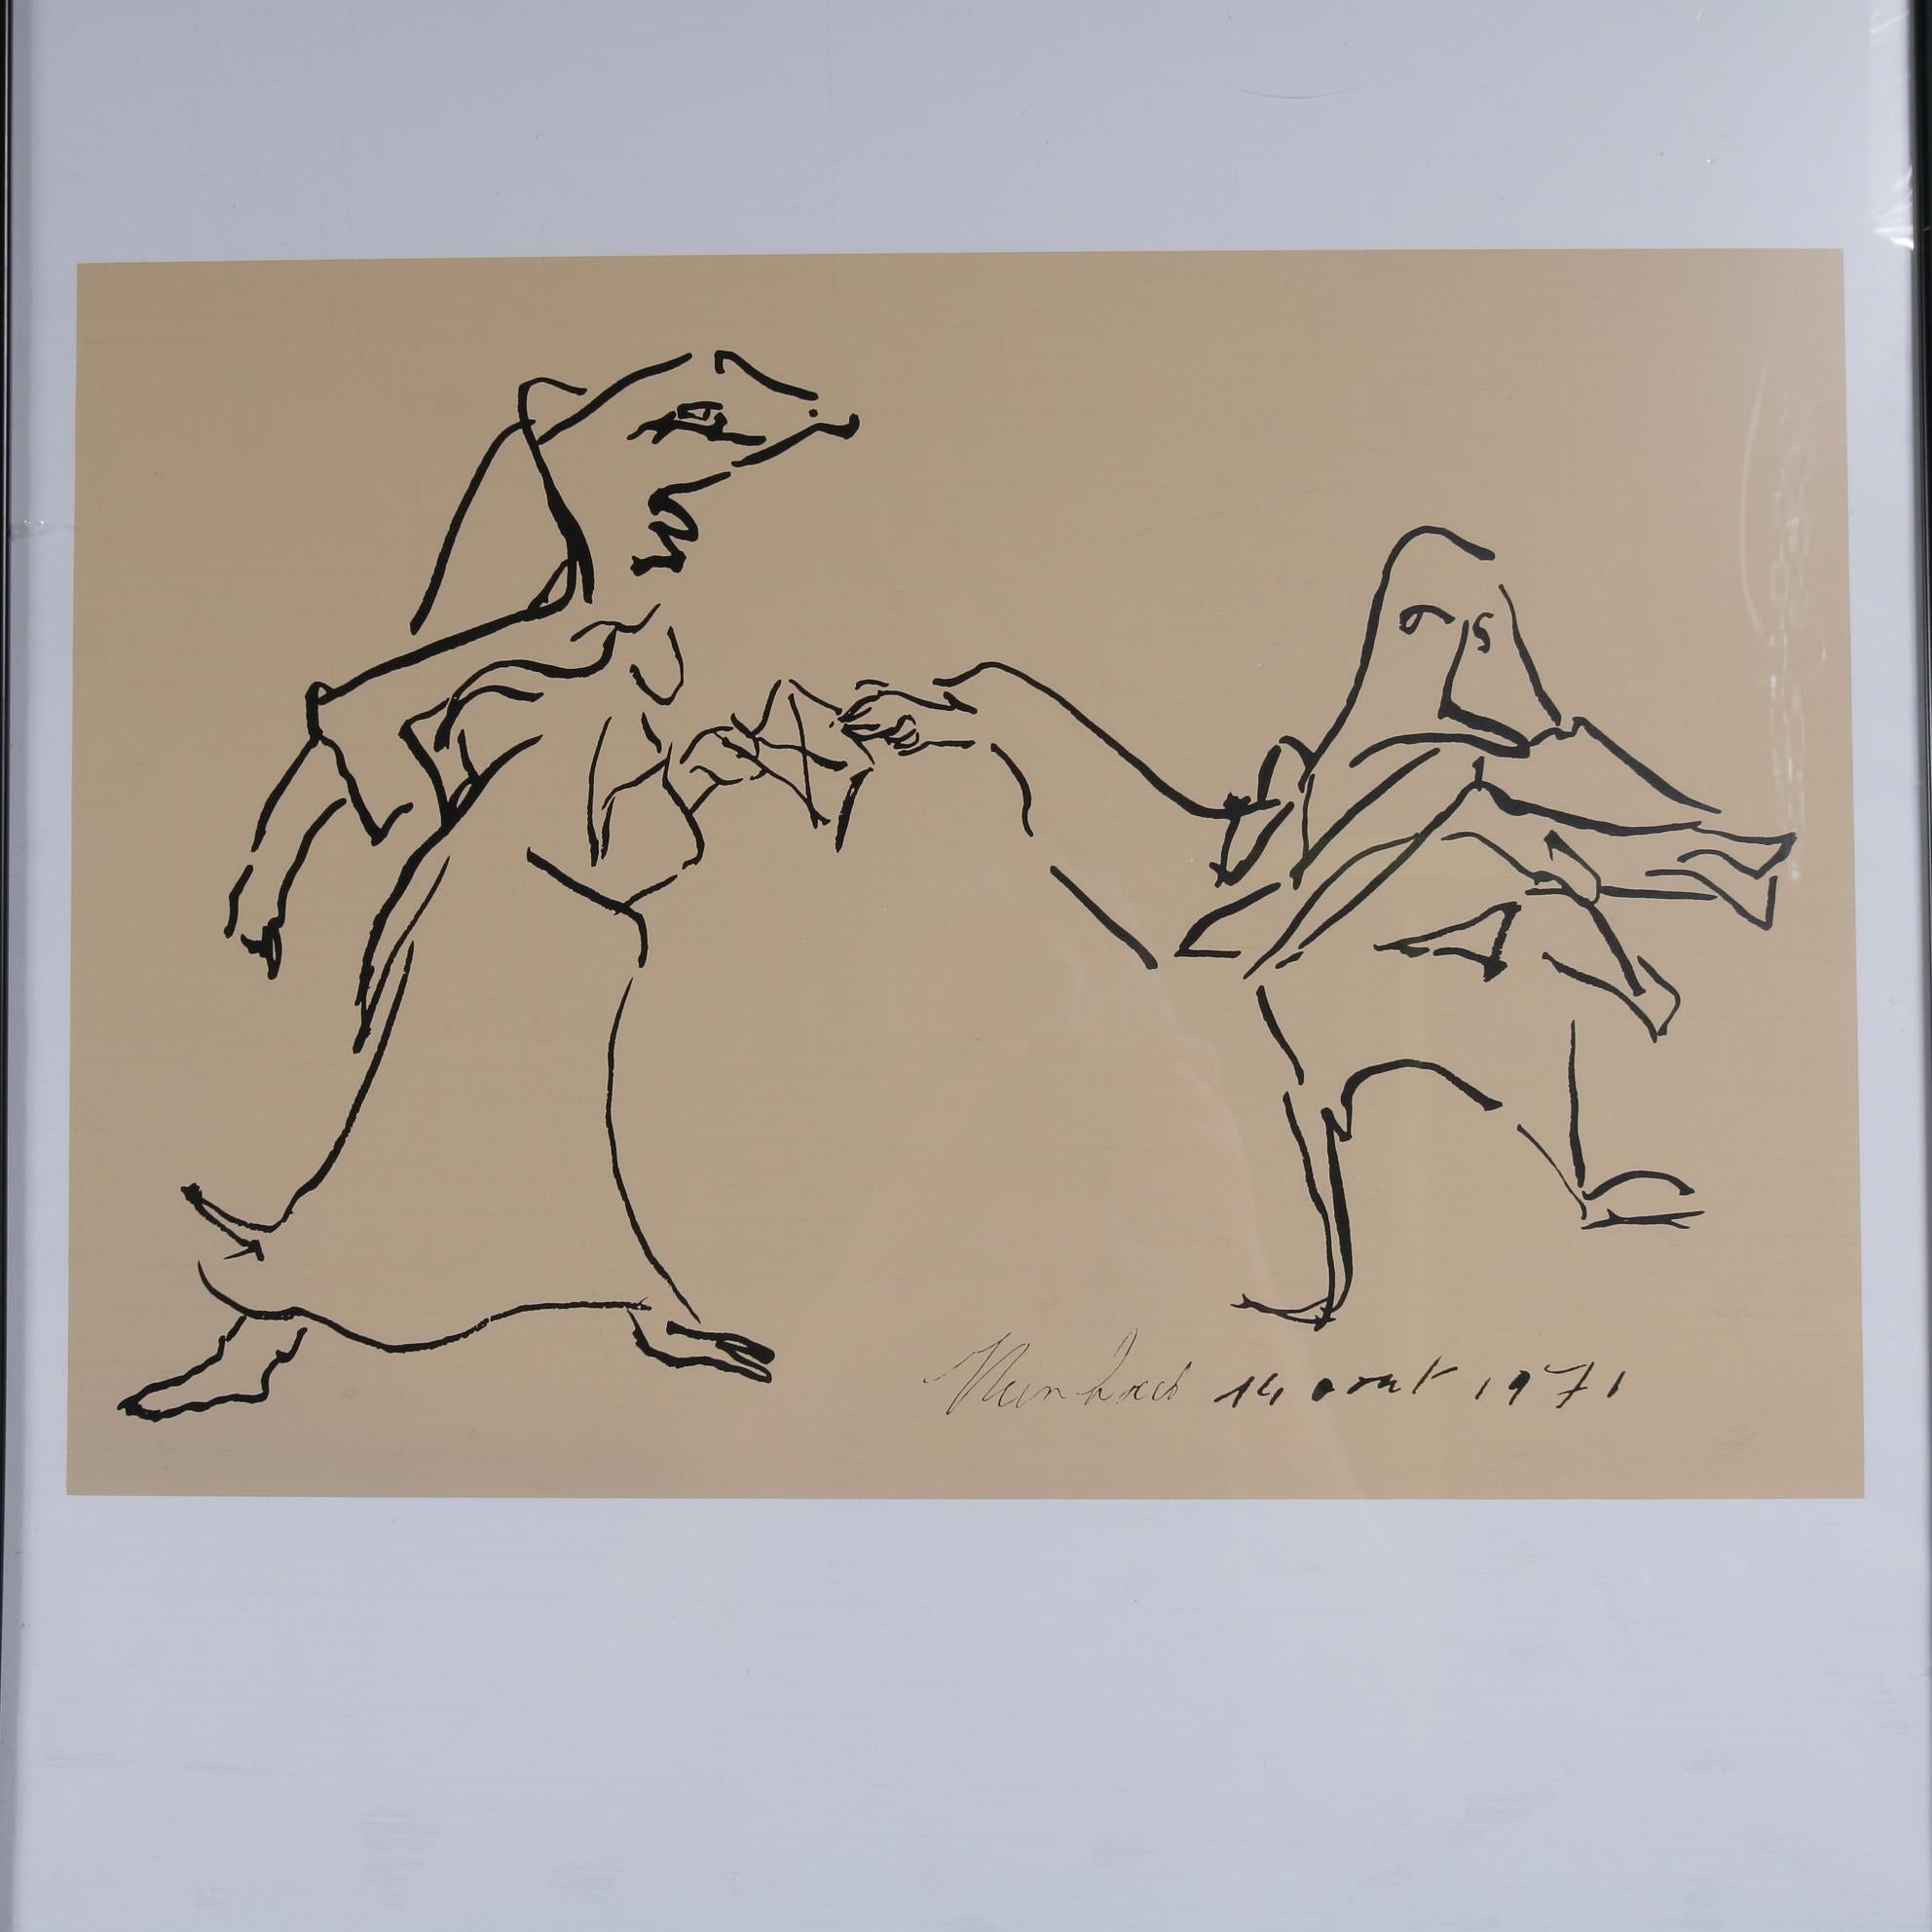 A beautiful rare silk screen by Reinhoud d'Haese, made in 1971.

The piece is signed and dated and shows a beautiful, minimalist style artwork of two people in the iconic style of d'Haese. It is framed in a vertical fram with a white